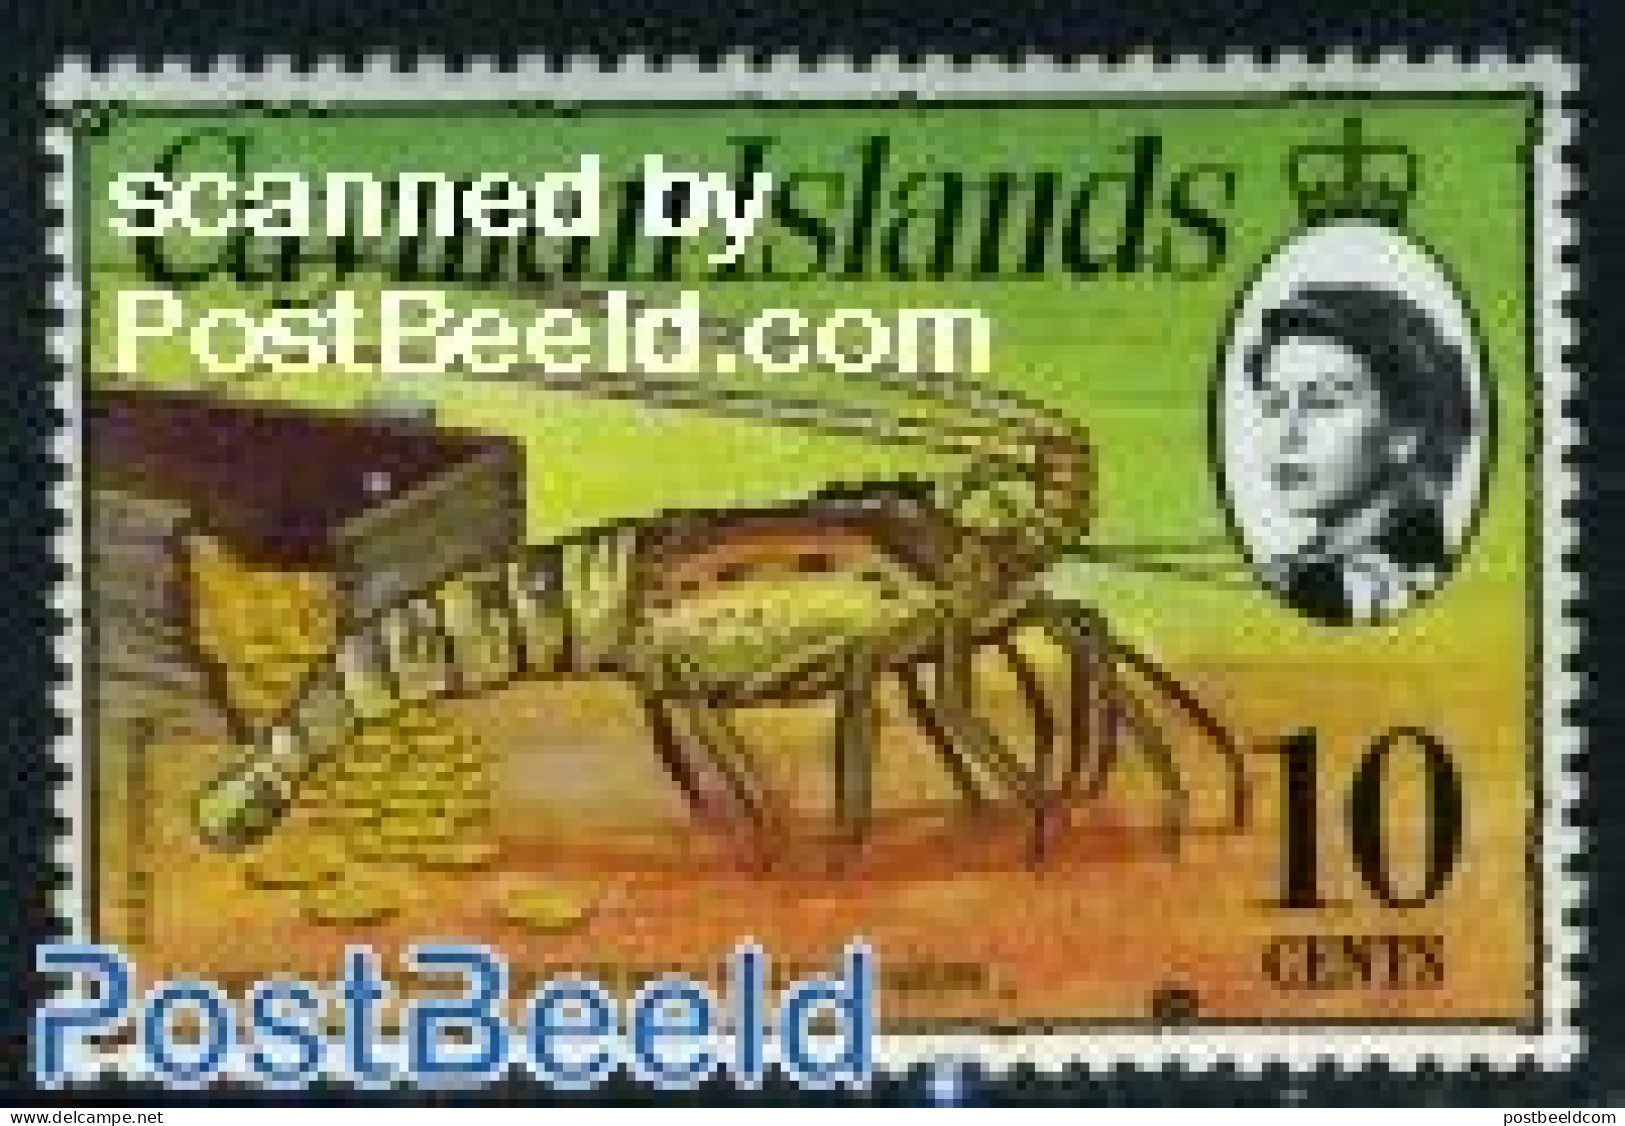 Cayman Islands 1974 10c, Stamp Out Of Set, Mint NH, Nature - Caimán (Islas)